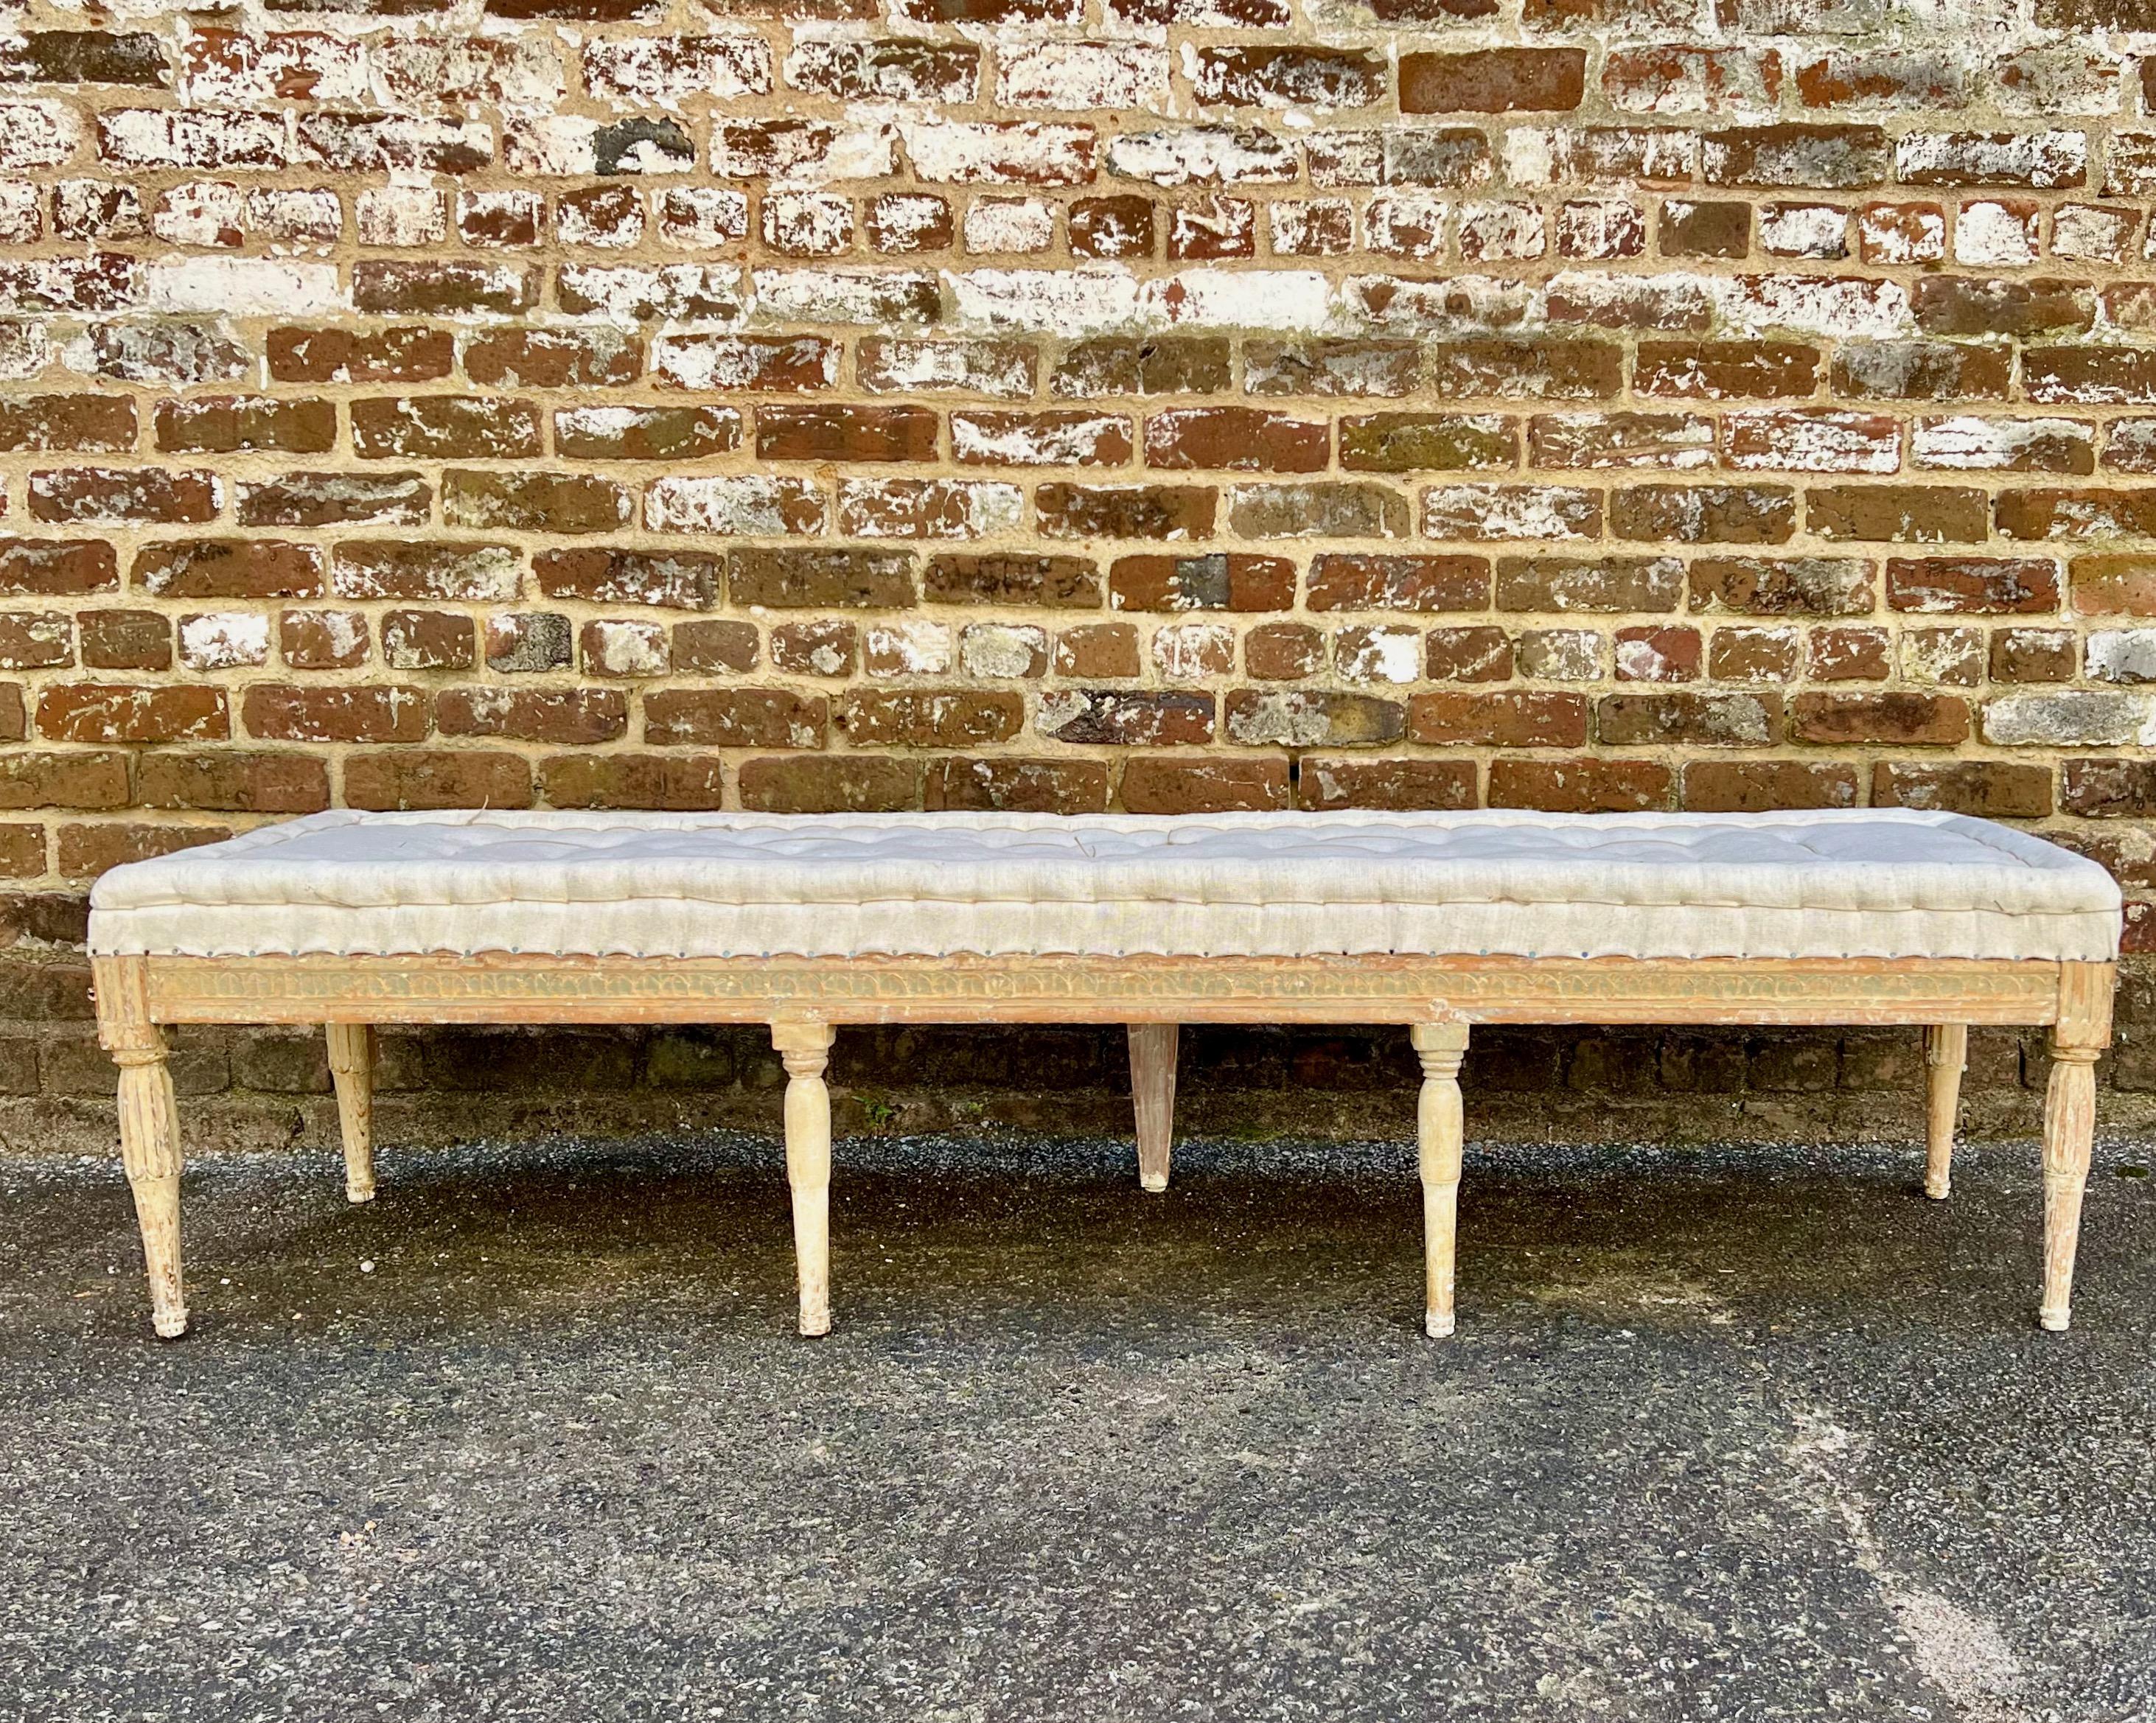 Very rare. Swedish Gustavian period bench, circa 1800, finished on all three  sides with Guilloché carvings on carved round fluted legs. Scraped to original cream /white finish and upholstered in traditional way in antique handstitched linen.